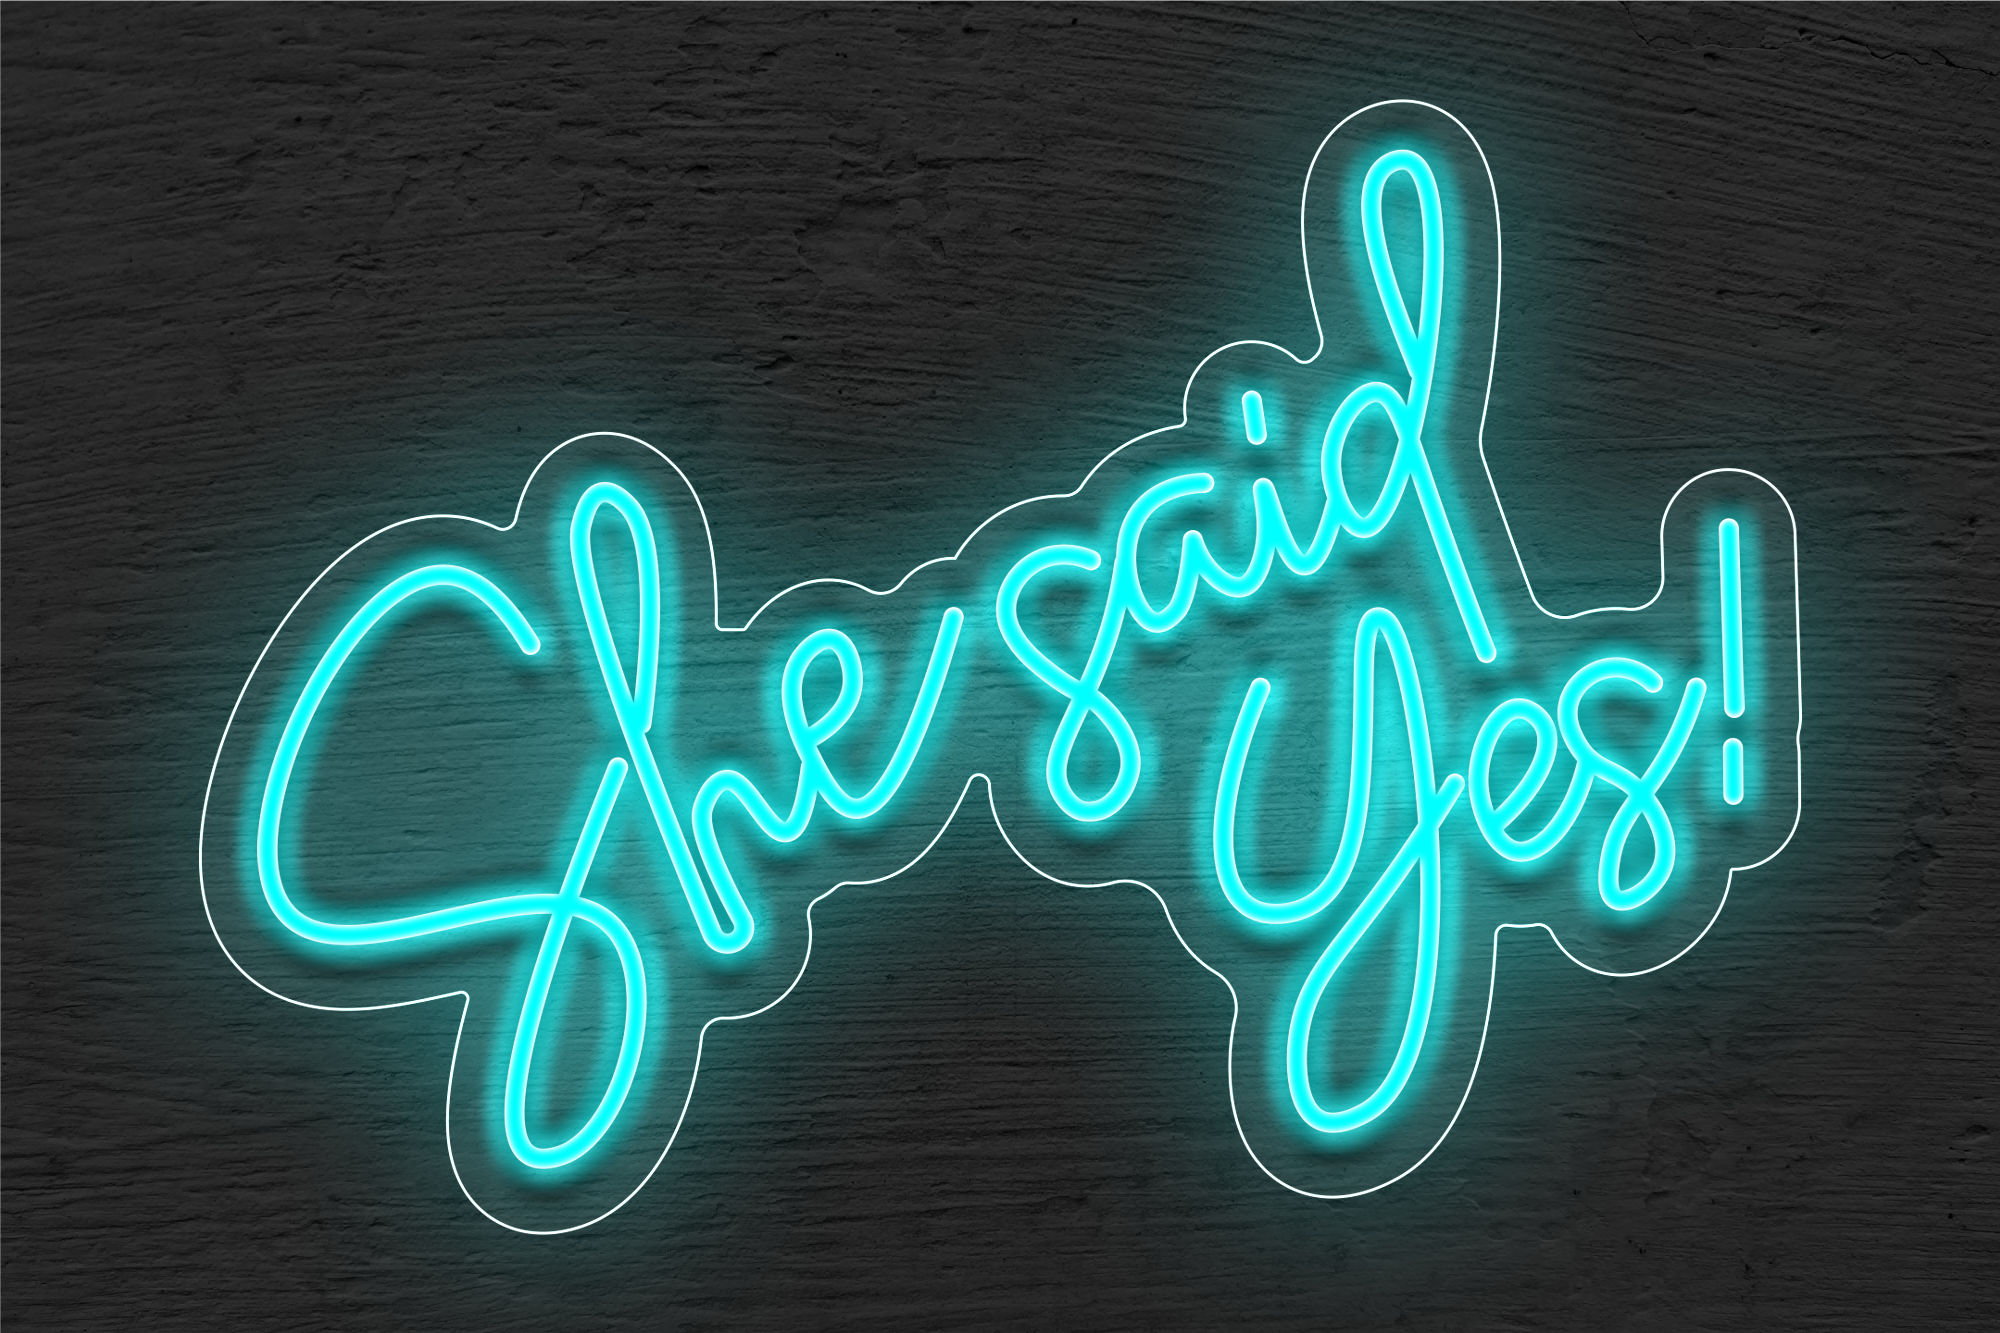 "She Said Yes!" LED Neon Sign